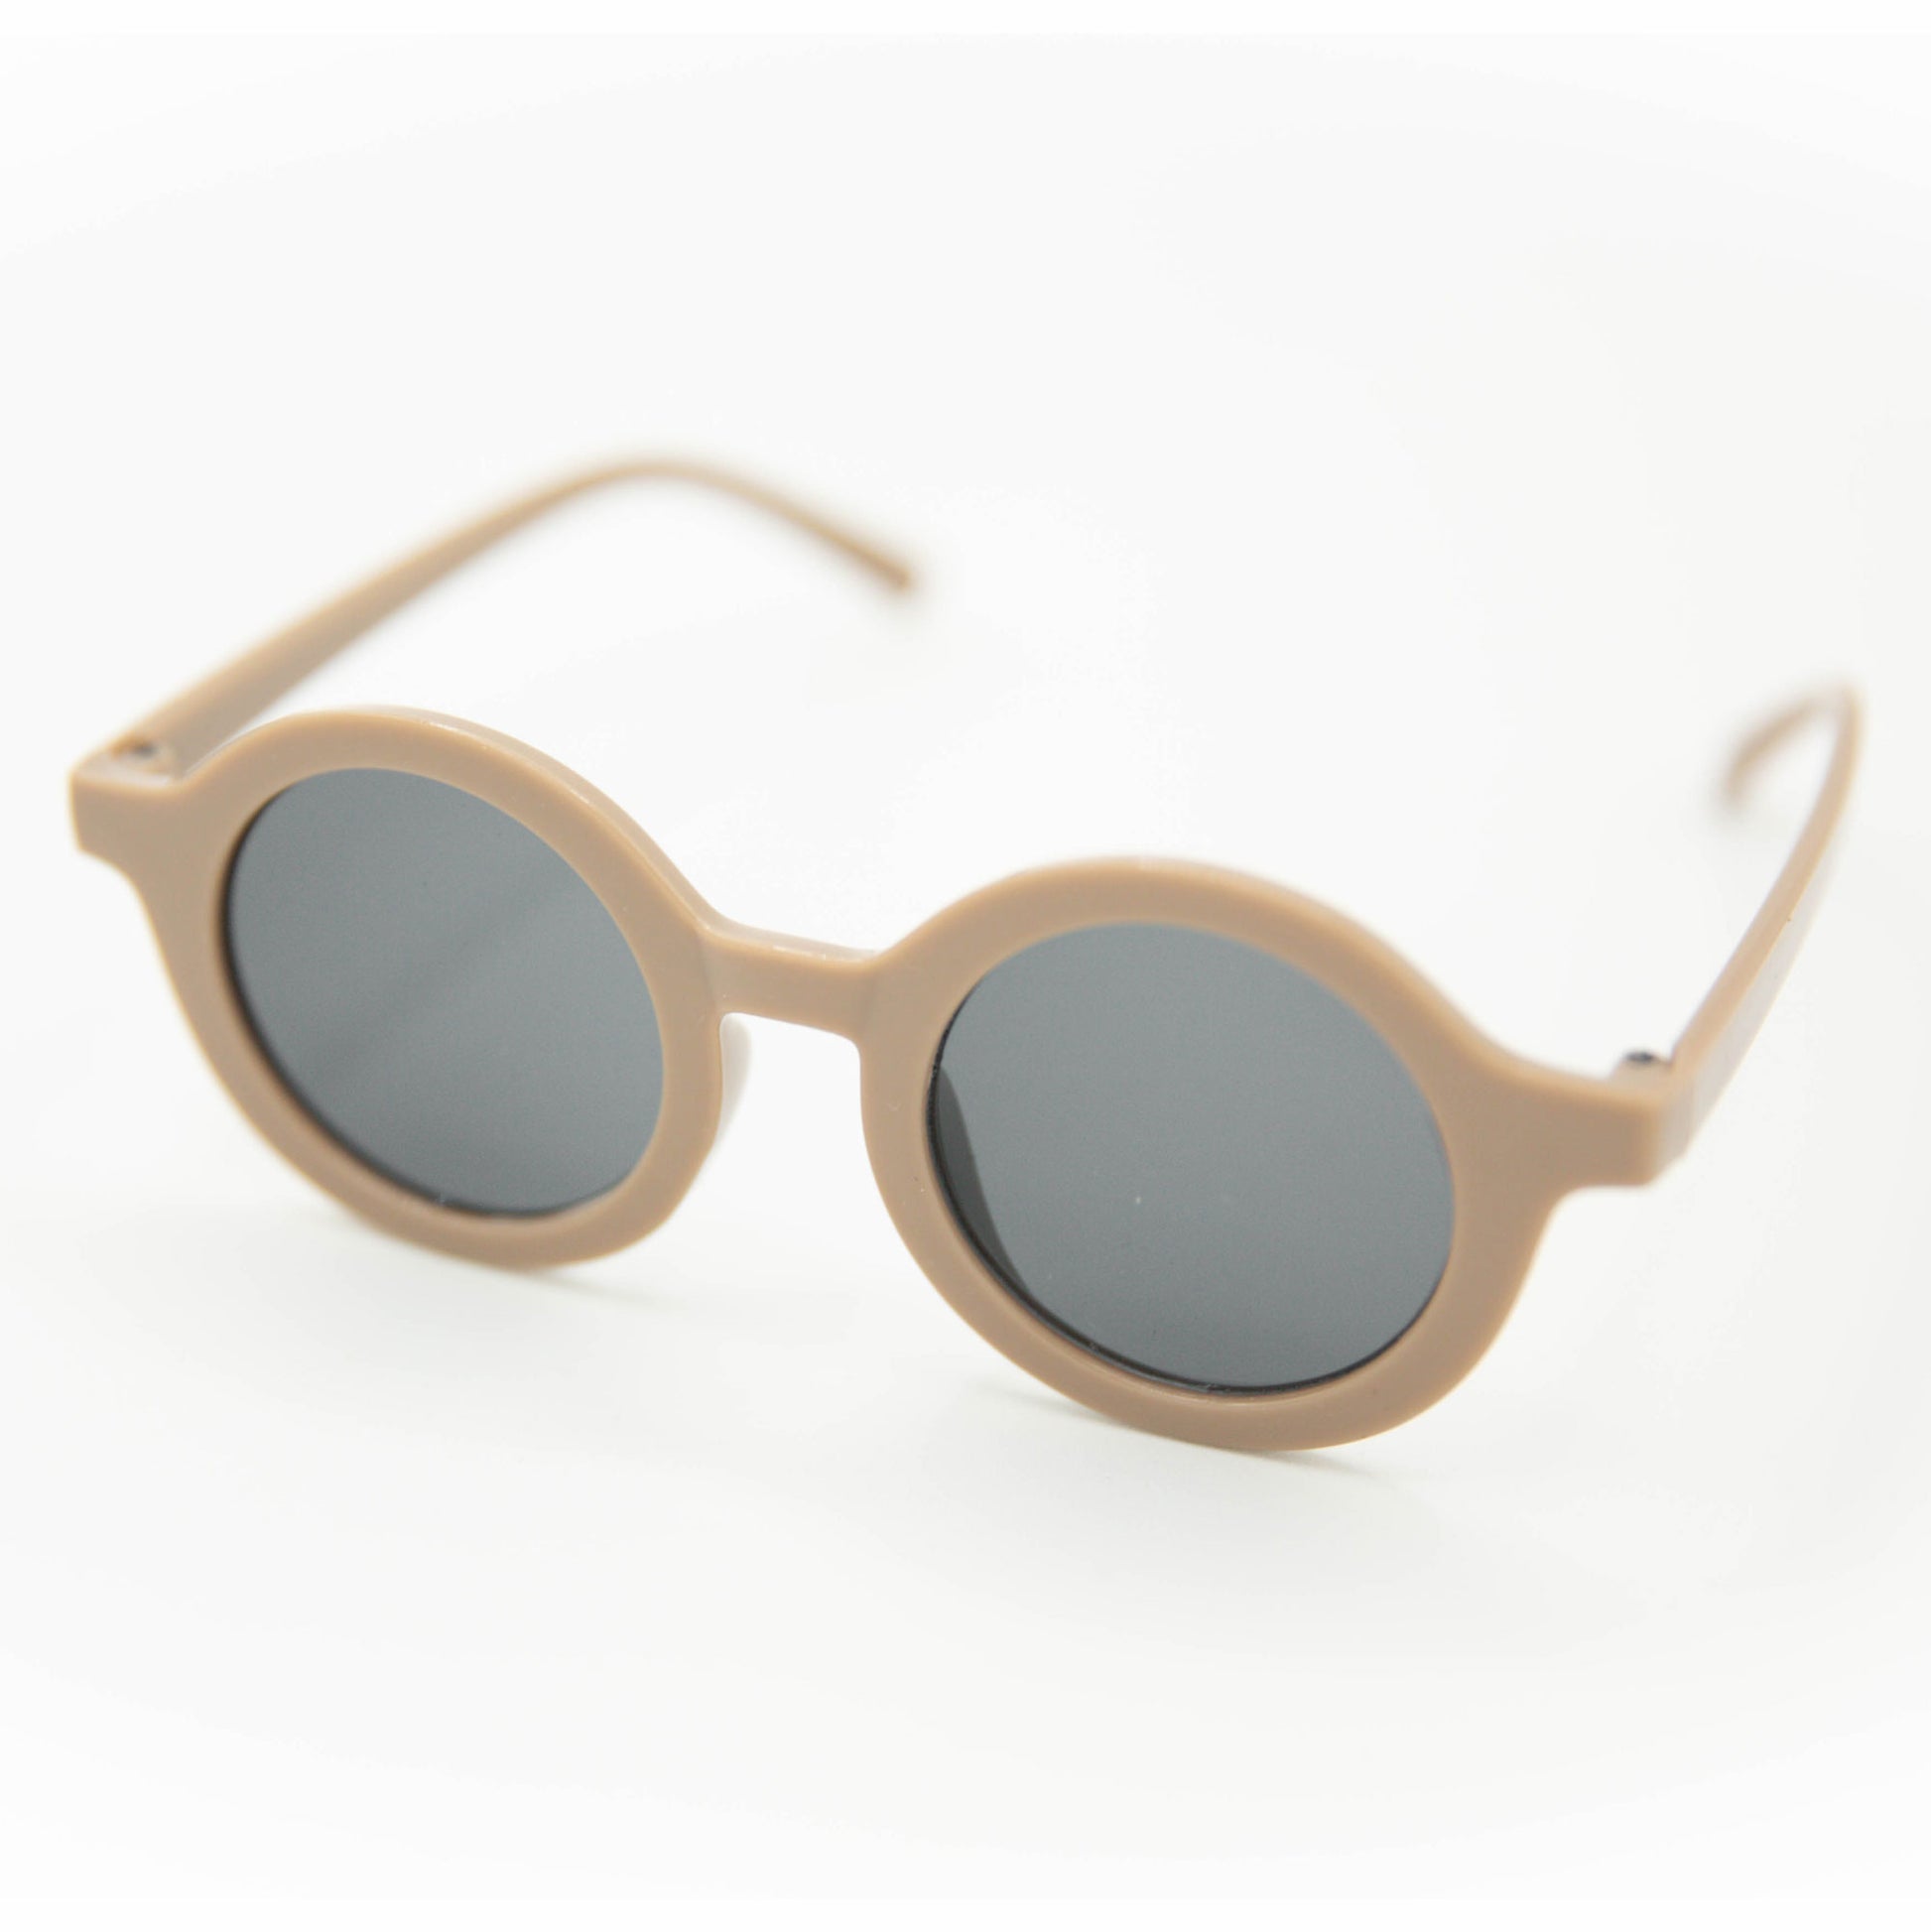 The Baby Cubby Kids' Round Retro Sunglasses - Warm Taupe with Grey Lenses